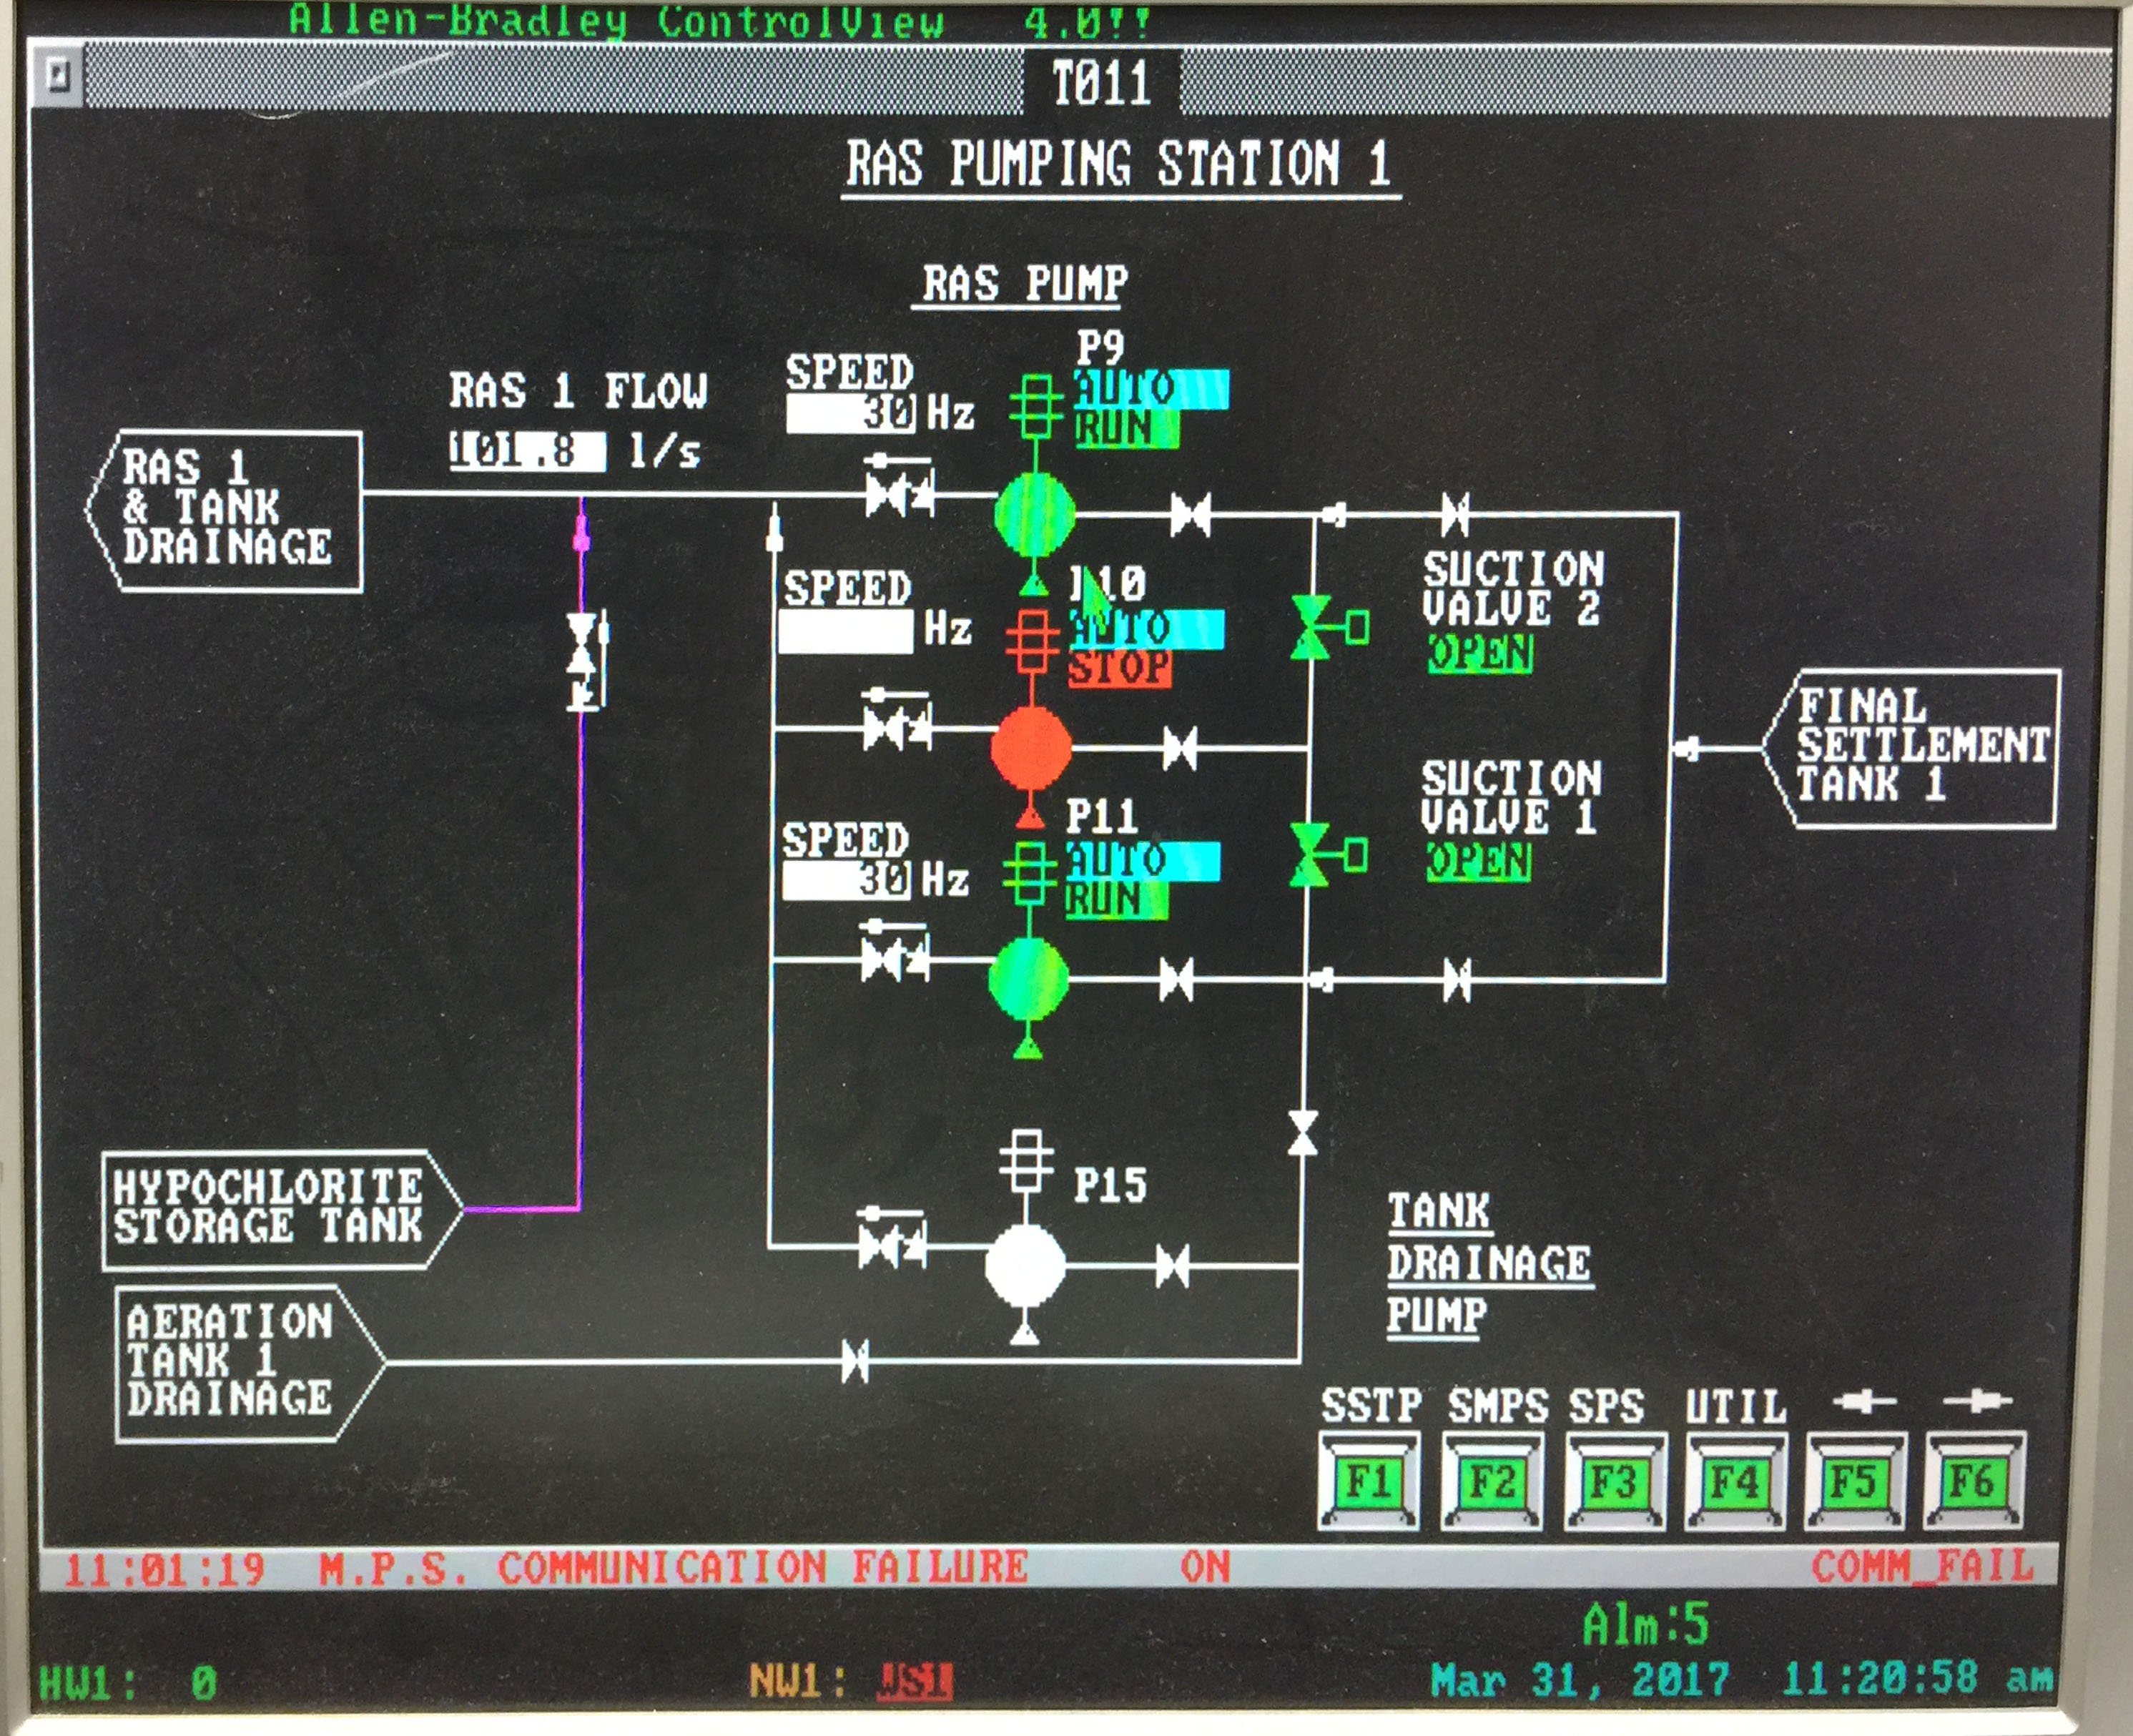 Part of RAS Pumping System screenshot from ControlView Before Works in DSD Stanley STW (Typical)